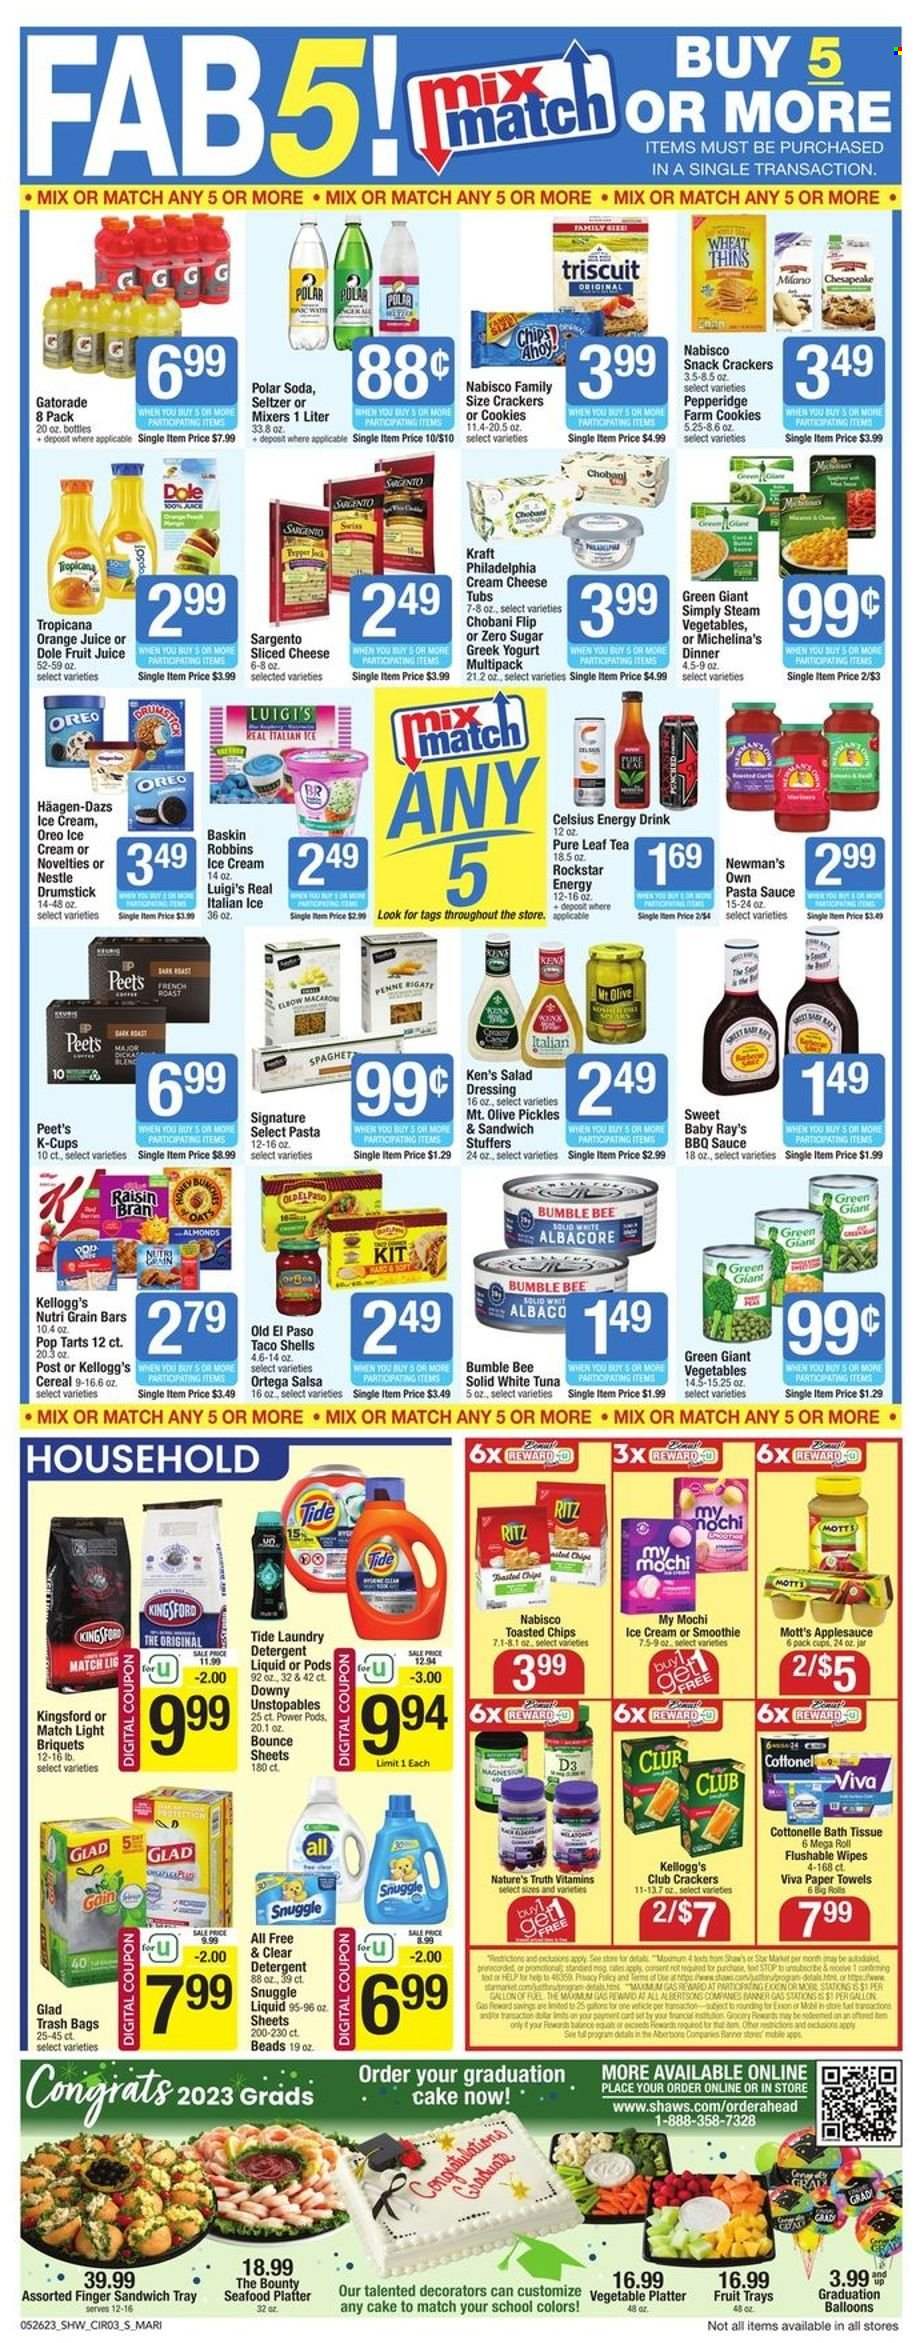 thumbnail - Shaw’s Flyer - 05/26/2023 - 06/01/2023 - Sales products - cake, Old El Paso, Dole, Mott's, tuna, seafood, pasta sauce, sandwich, Bumble Bee, sauce, Kraft®, Kingsford, roast, snack, cream cheese, sliced cheese, Philadelphia, Pepper Jack cheese, Sargento, greek yoghurt, Oreo, Chobani, ice cream, Häagen-Dazs, ice cones, cookies, Nestlé, Bounty, crackers, Kellogg's, Pop-Tarts, RITZ, Nabisco, chips, pickles, cereals, Raisin Bran, Nutri-Grain, penne, BBQ sauce, salad dressing, dressing, salsa, apple sauce, almonds, orange juice, juice, fruit juice, energy drink, ice tea, Rockstar, Gatorade, smoothie, seltzer water, soda, Pure Leaf, coffee capsules, K-Cups, bath tissue, Cottonelle, wipes, kitchen towels, paper towels, detergent, Gain, Snuggle, Tide, Unstopables, laundry detergent, Bounce, trash bags, tray, platters, balloons, Mobil, magnesium, Nature's Truth, vitamin D3, electrolyte drink. Page 3.